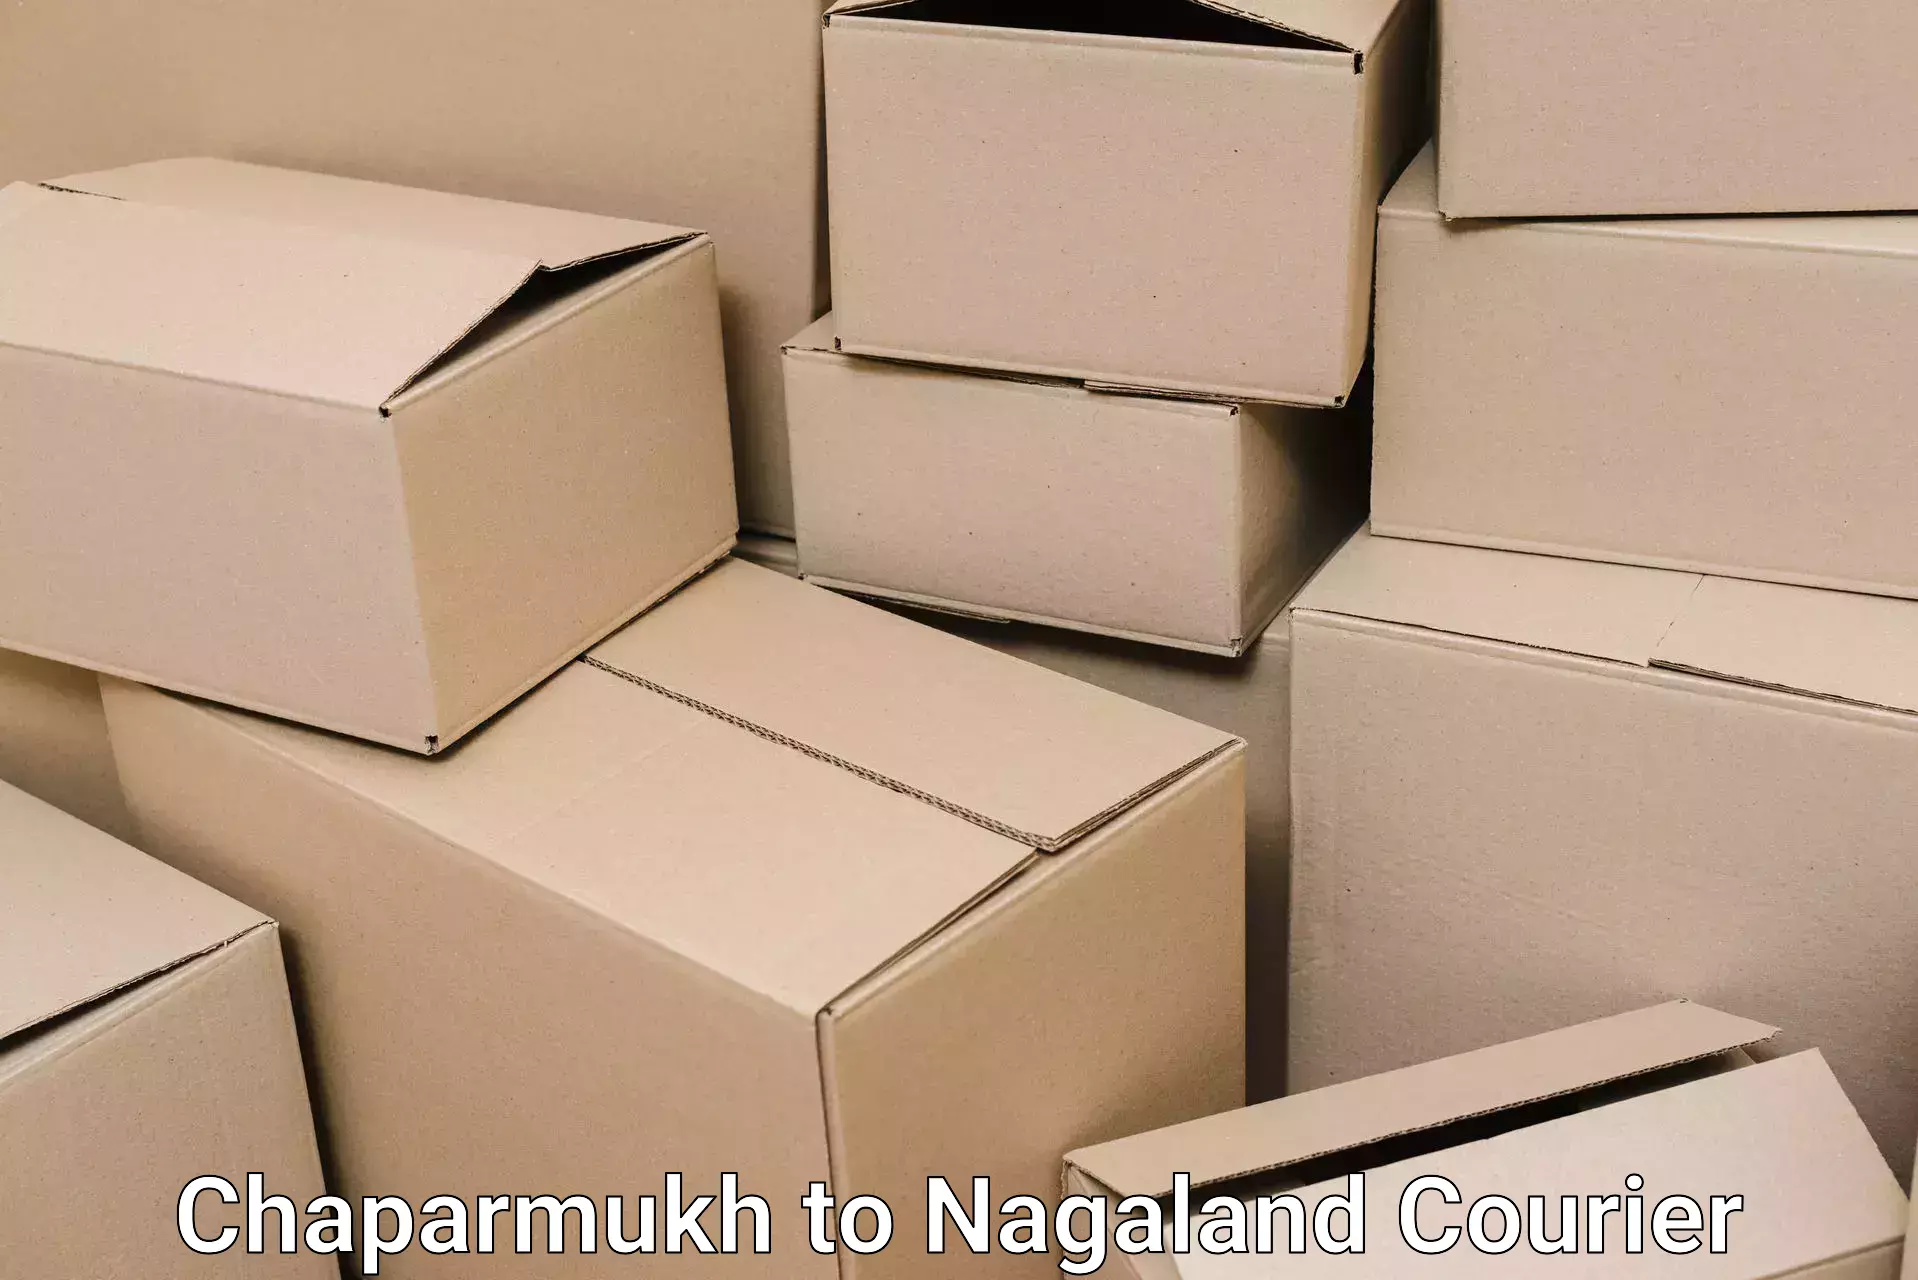 Furniture delivery service Chaparmukh to Nagaland